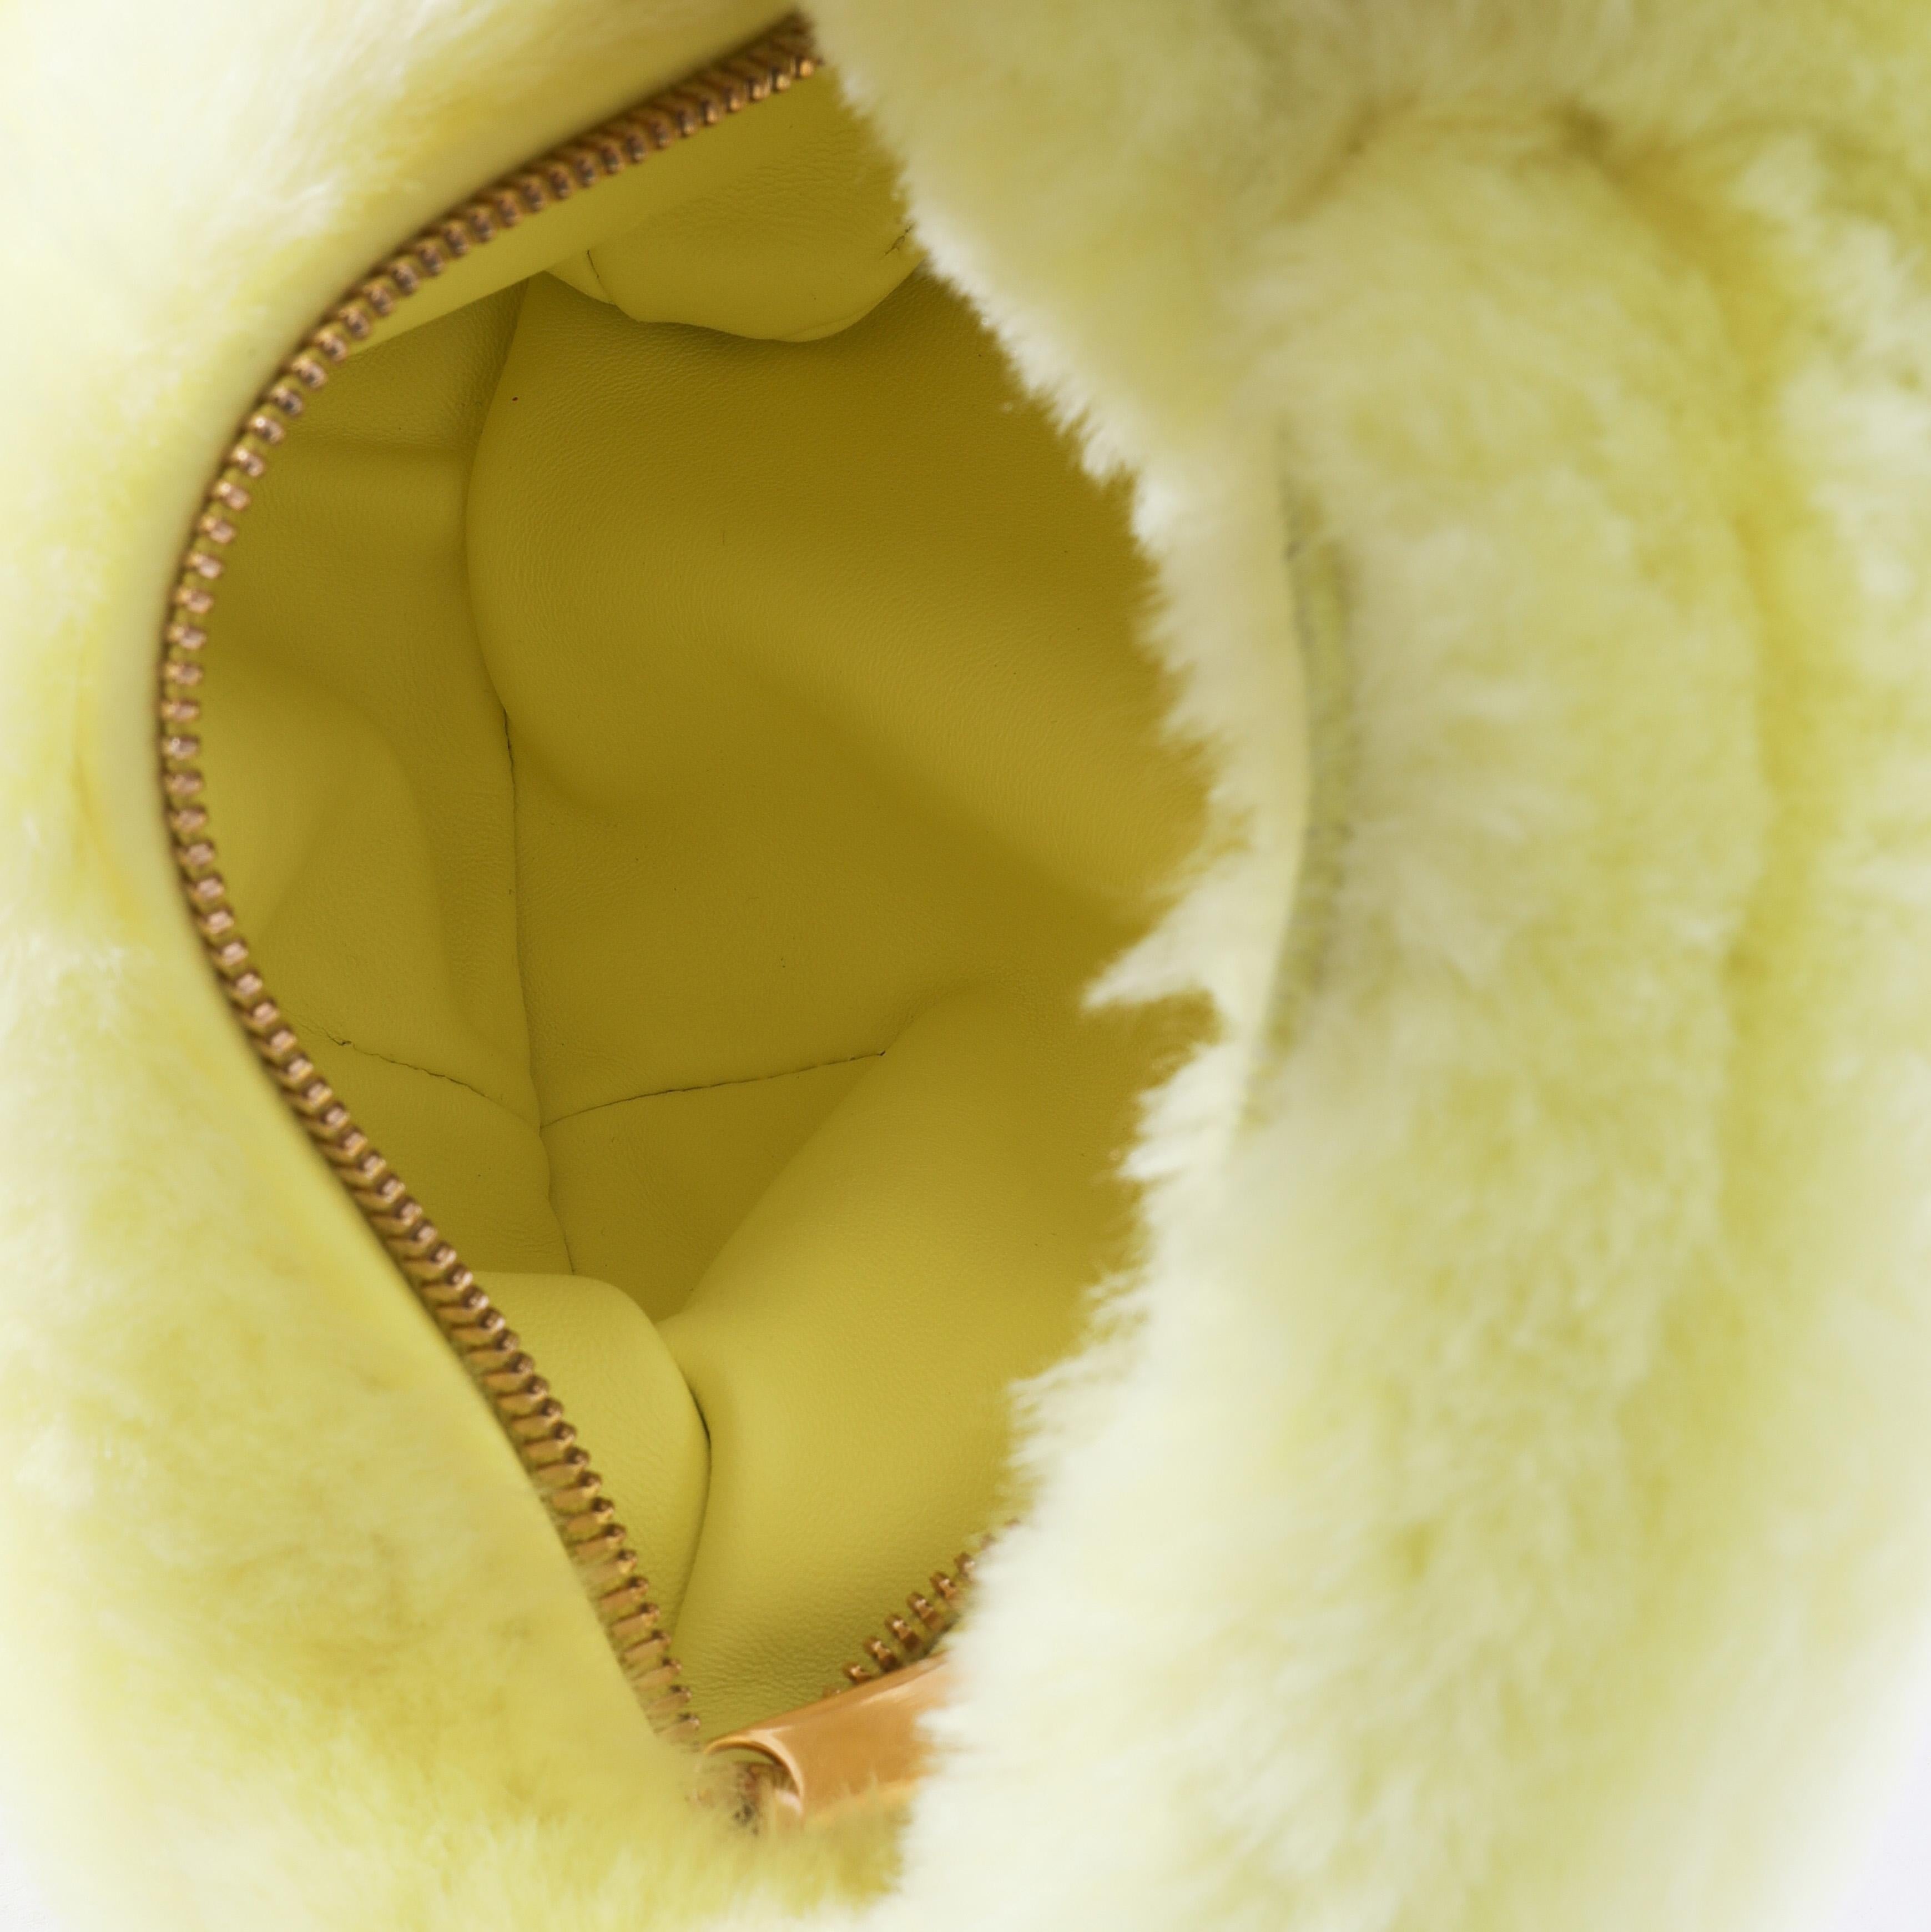 Listing Title: Bottega Veneta Pale Yellow Shearling Mini Jodie
SKU: 131256
MSRP: 3200.00
Condition: Pre-owned 
Condition Description: Made from leather in the signature Intrecciato weave, the mini Jodie bag from Bottega Veneta is exemplary of the